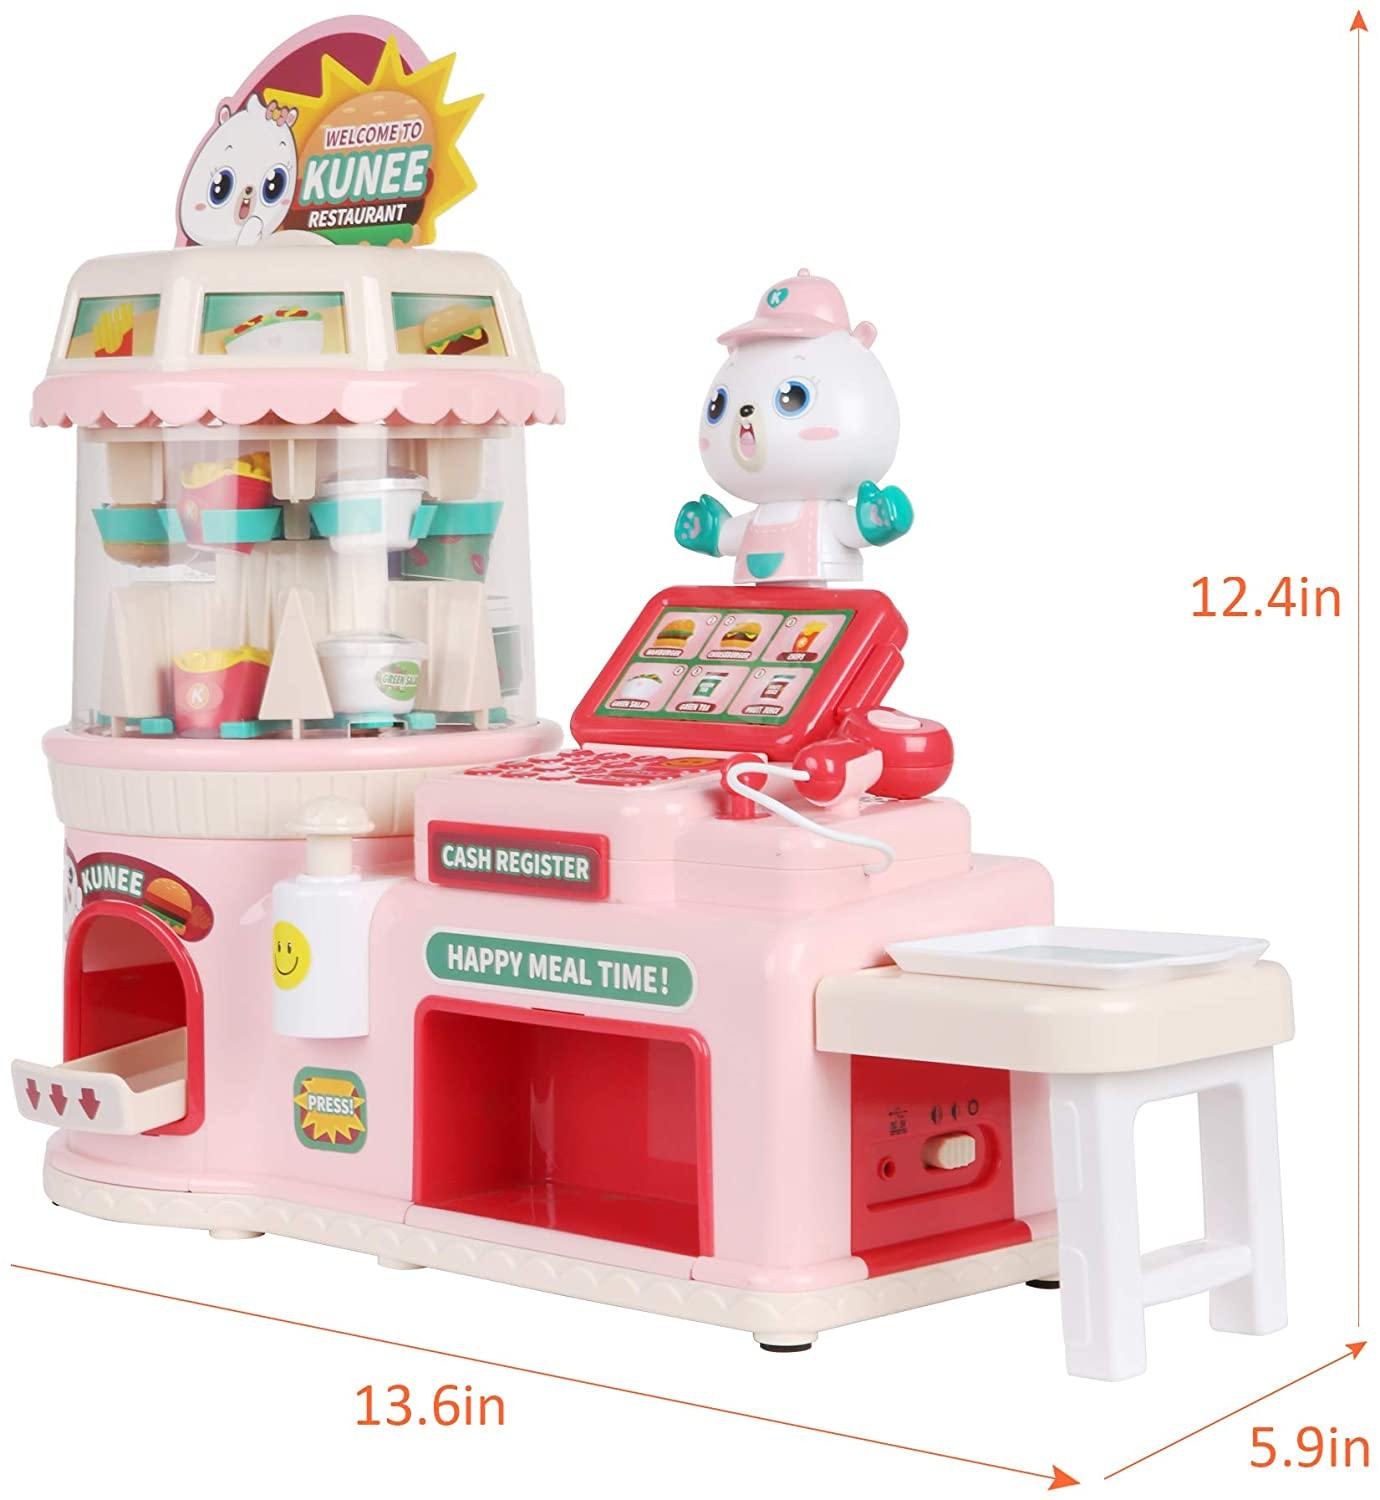 Kids Pretend Play Restaurant Set Interactive Vending Machine Game Play Calculator Cash Register Powered by USB Charge or Batteries - Bosonshop